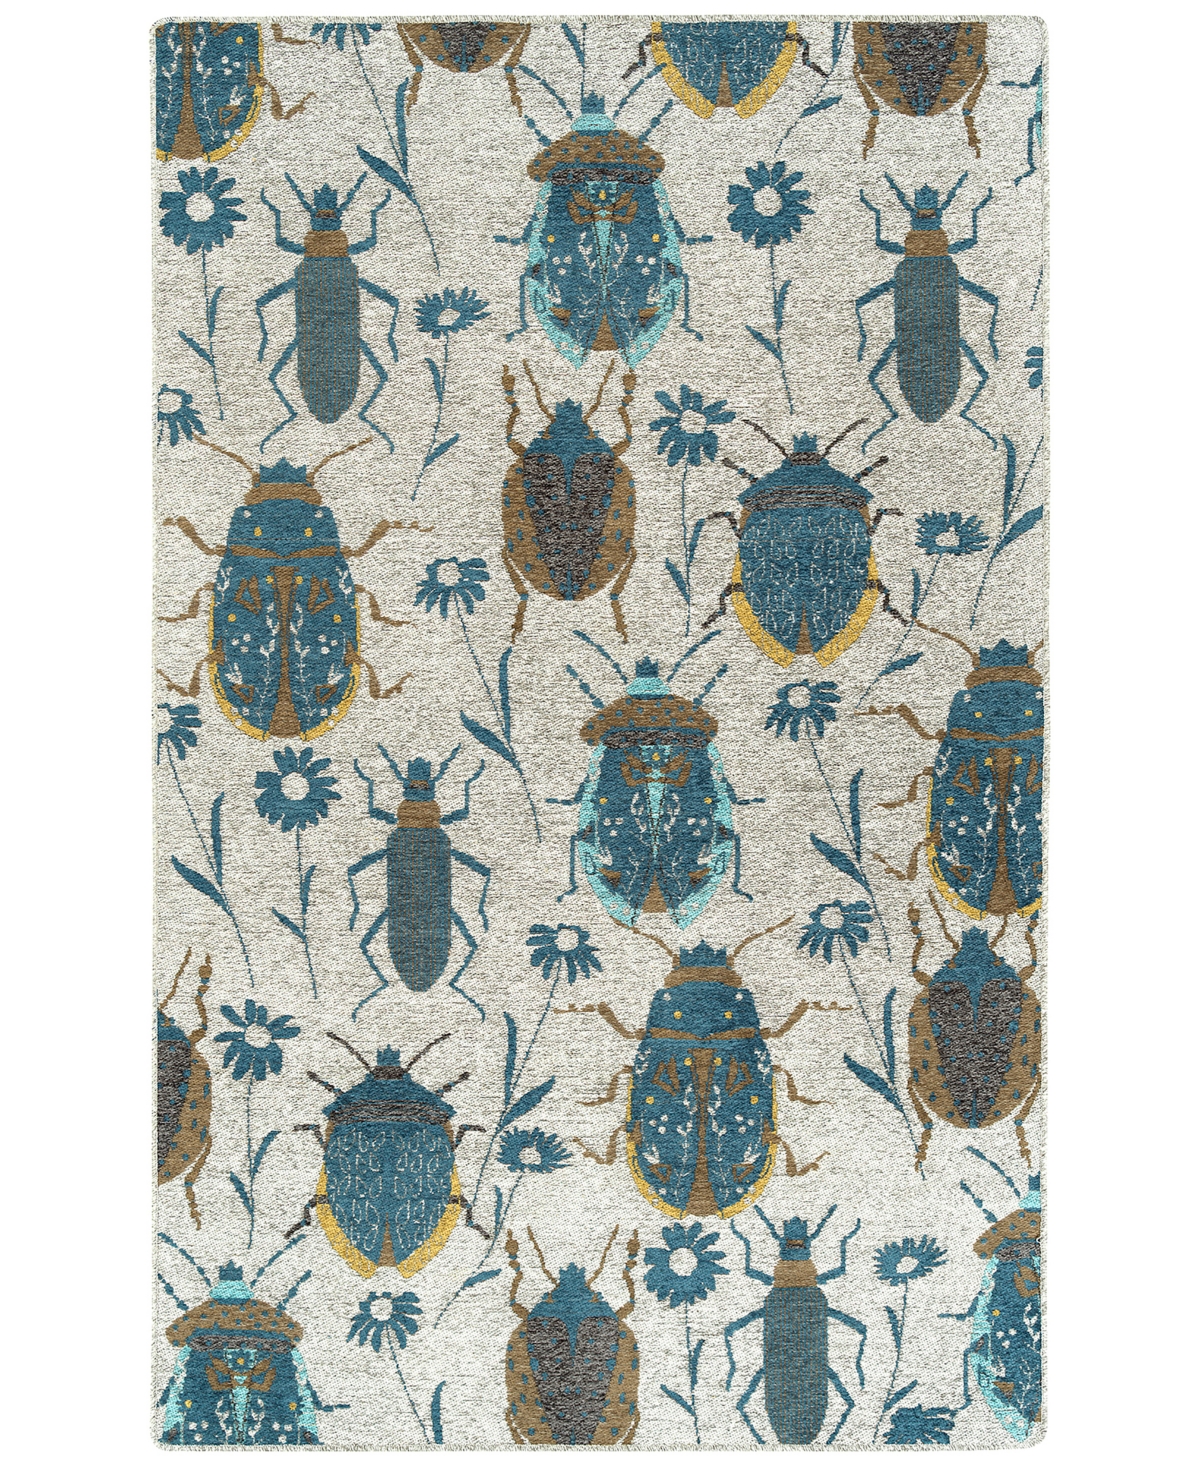 Hilary Farr Critter Comforts Hcc03-78 2' X 3' Area Rug In Blue